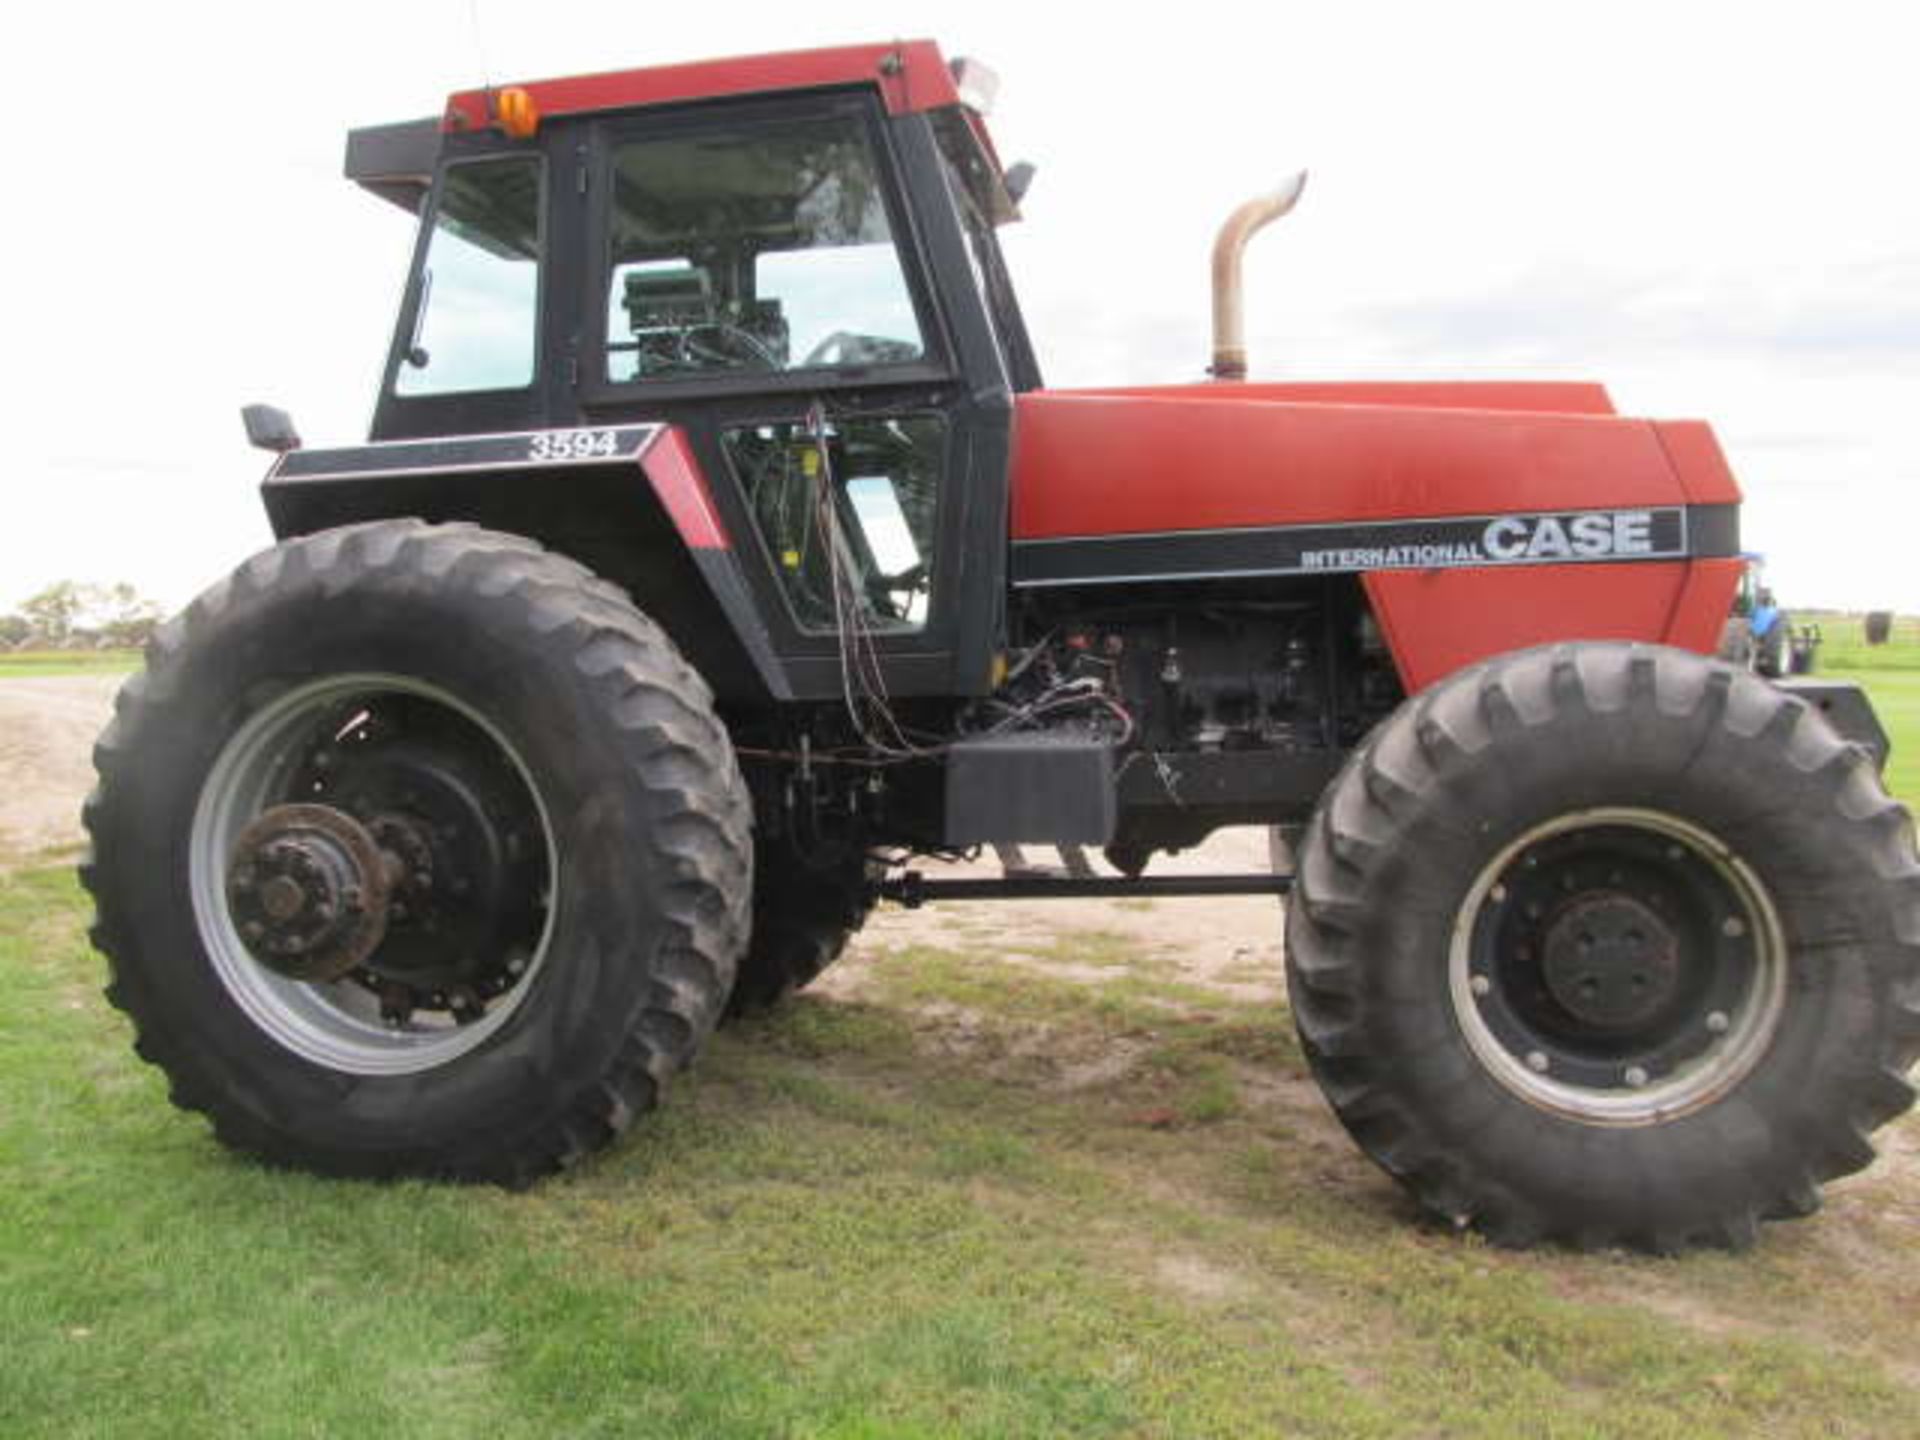 CASE IH 3594 FWA TRACTOR; 5830 Hours, Powershift, 3 Hydraulics, 20.8-38 Duals, SN.9947846-1987 - Image 5 of 6